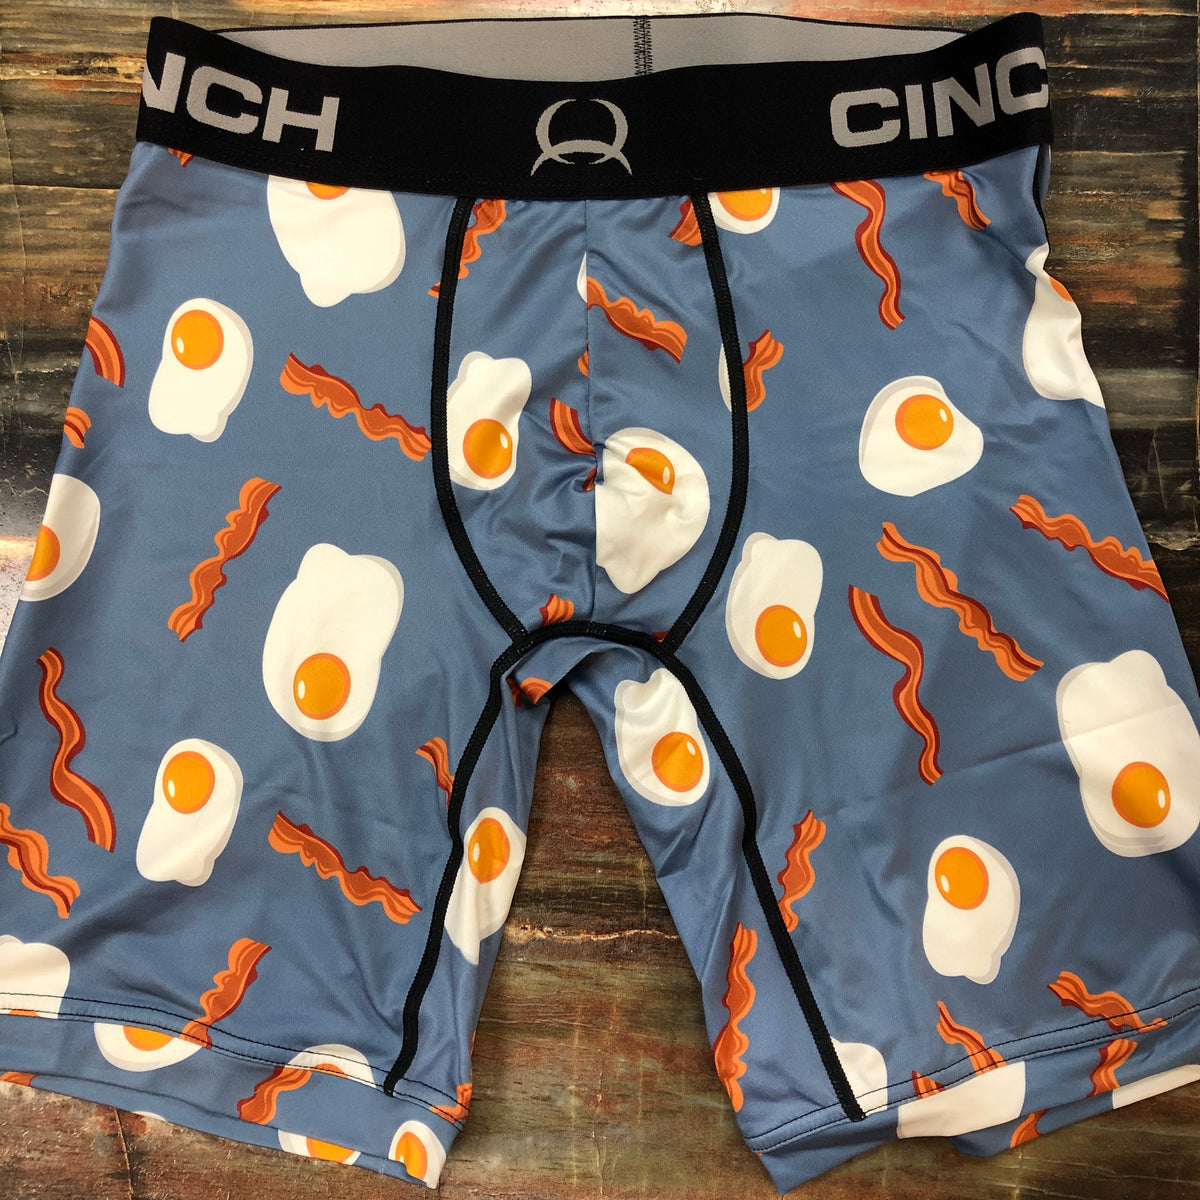 Cinch 9 Inch Eggs and Bacon Boxer Briefs